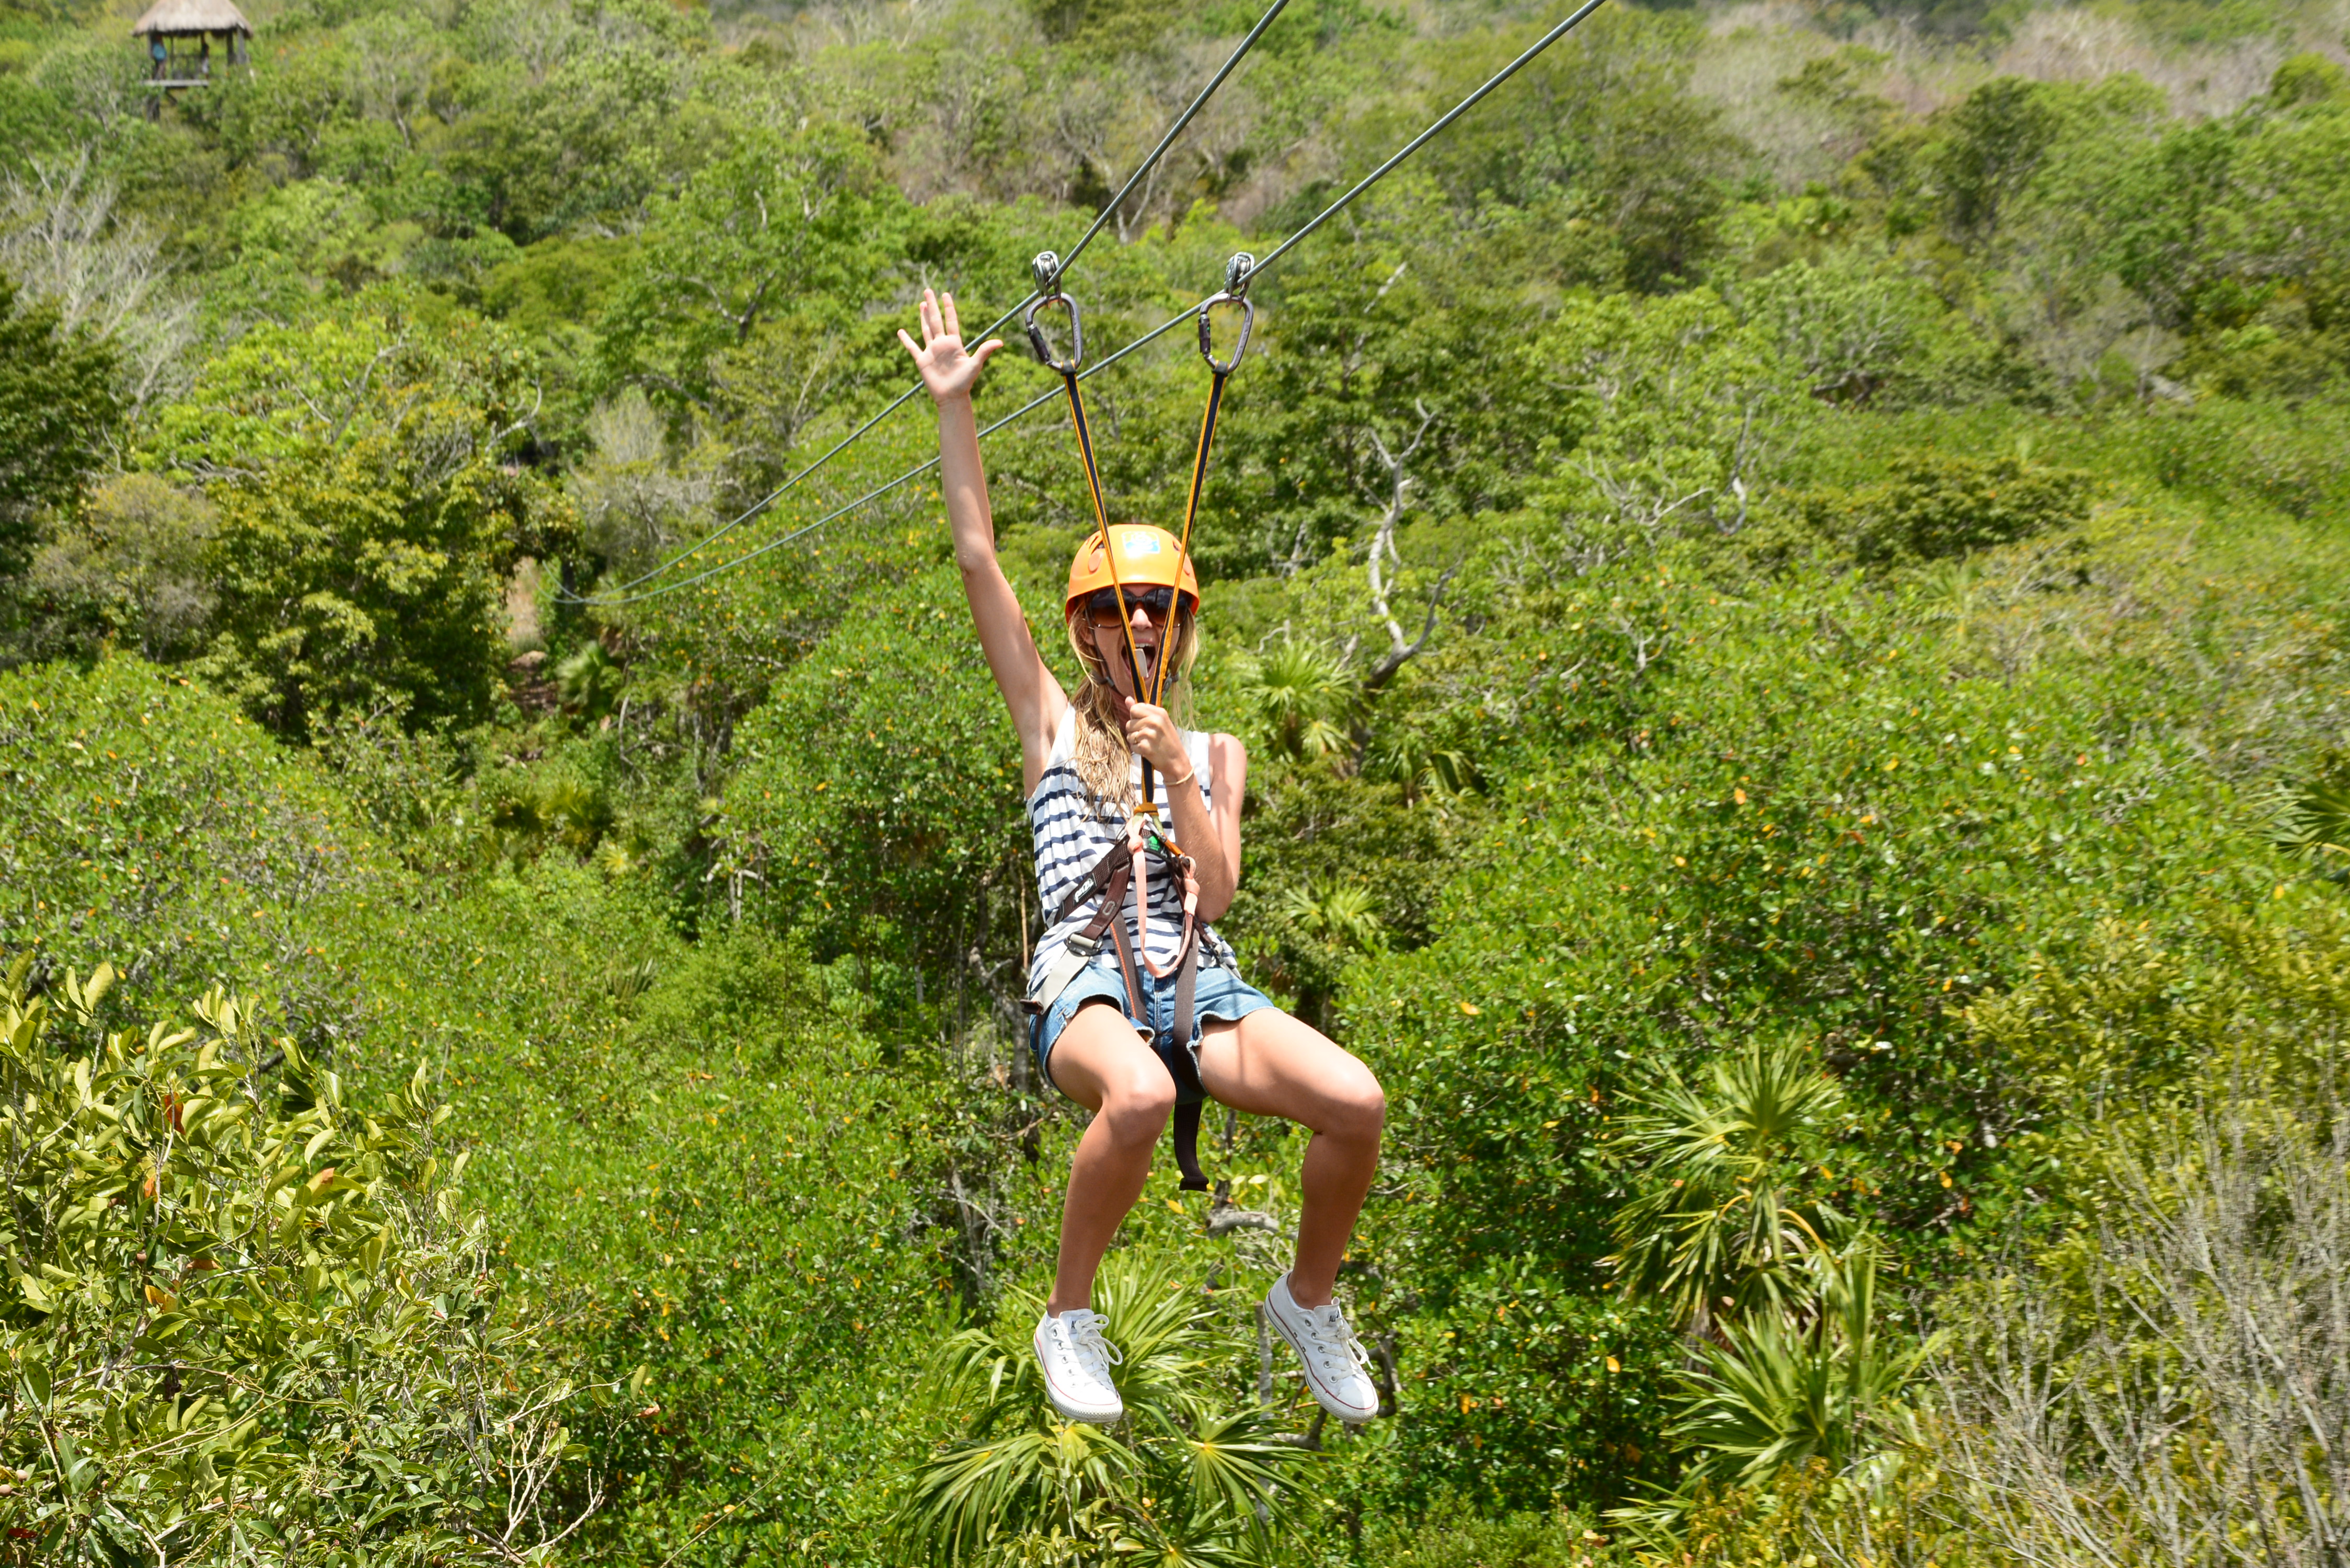 Get married, go zip lining? Might as well. Conquering fears in the Mayan Jungle. -Christina Markos